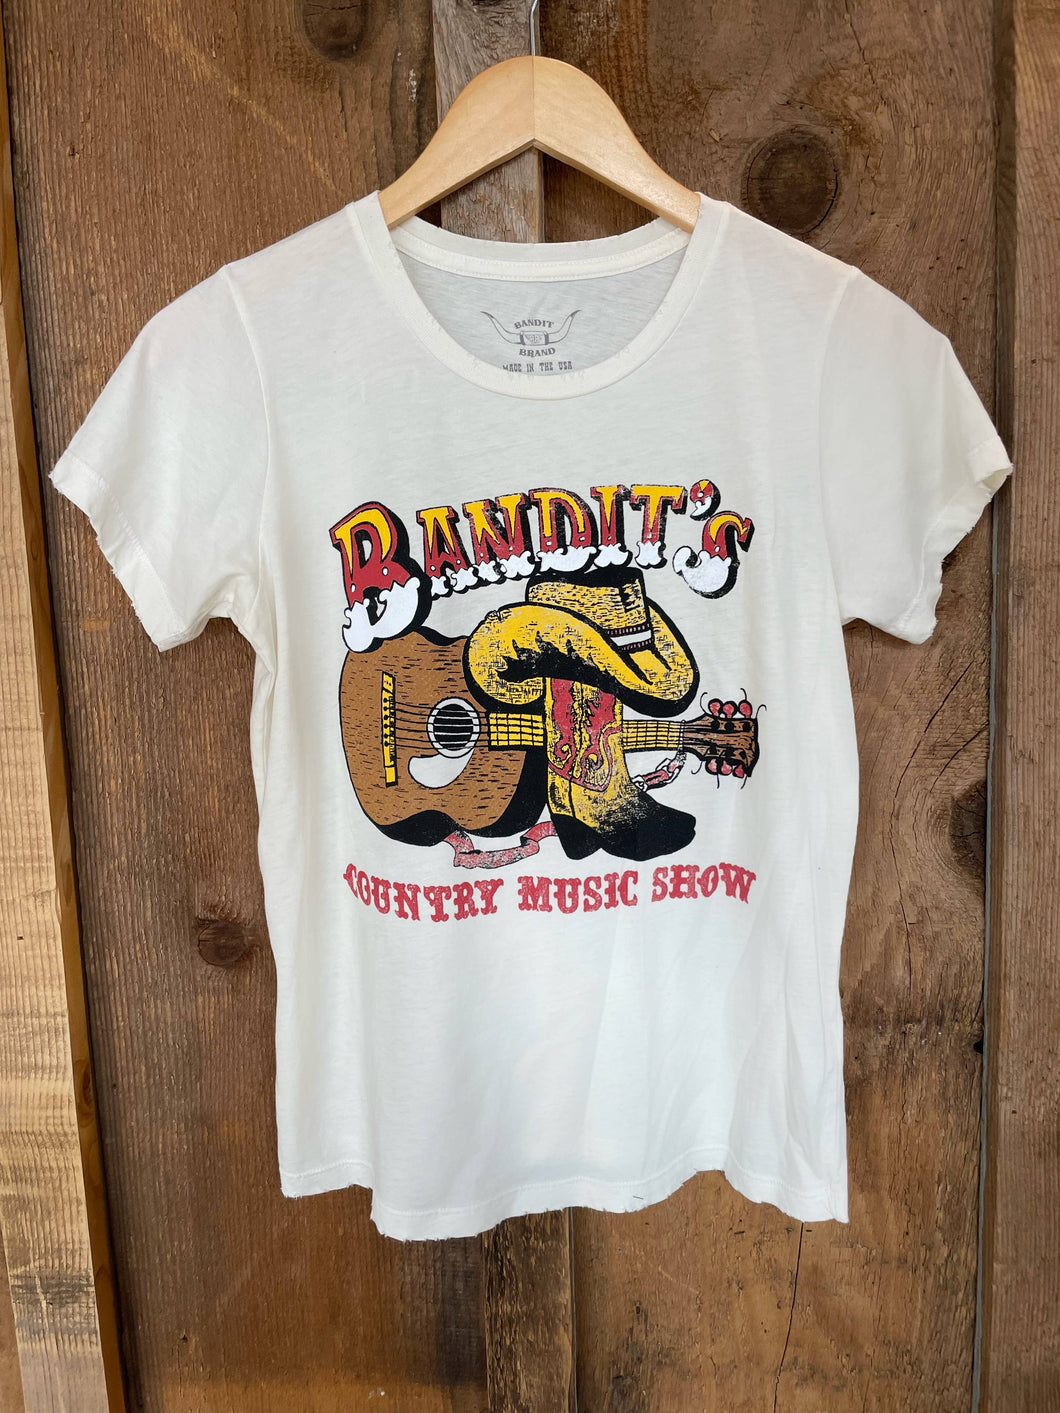 Bandit's Country Music Show Graphic Tee